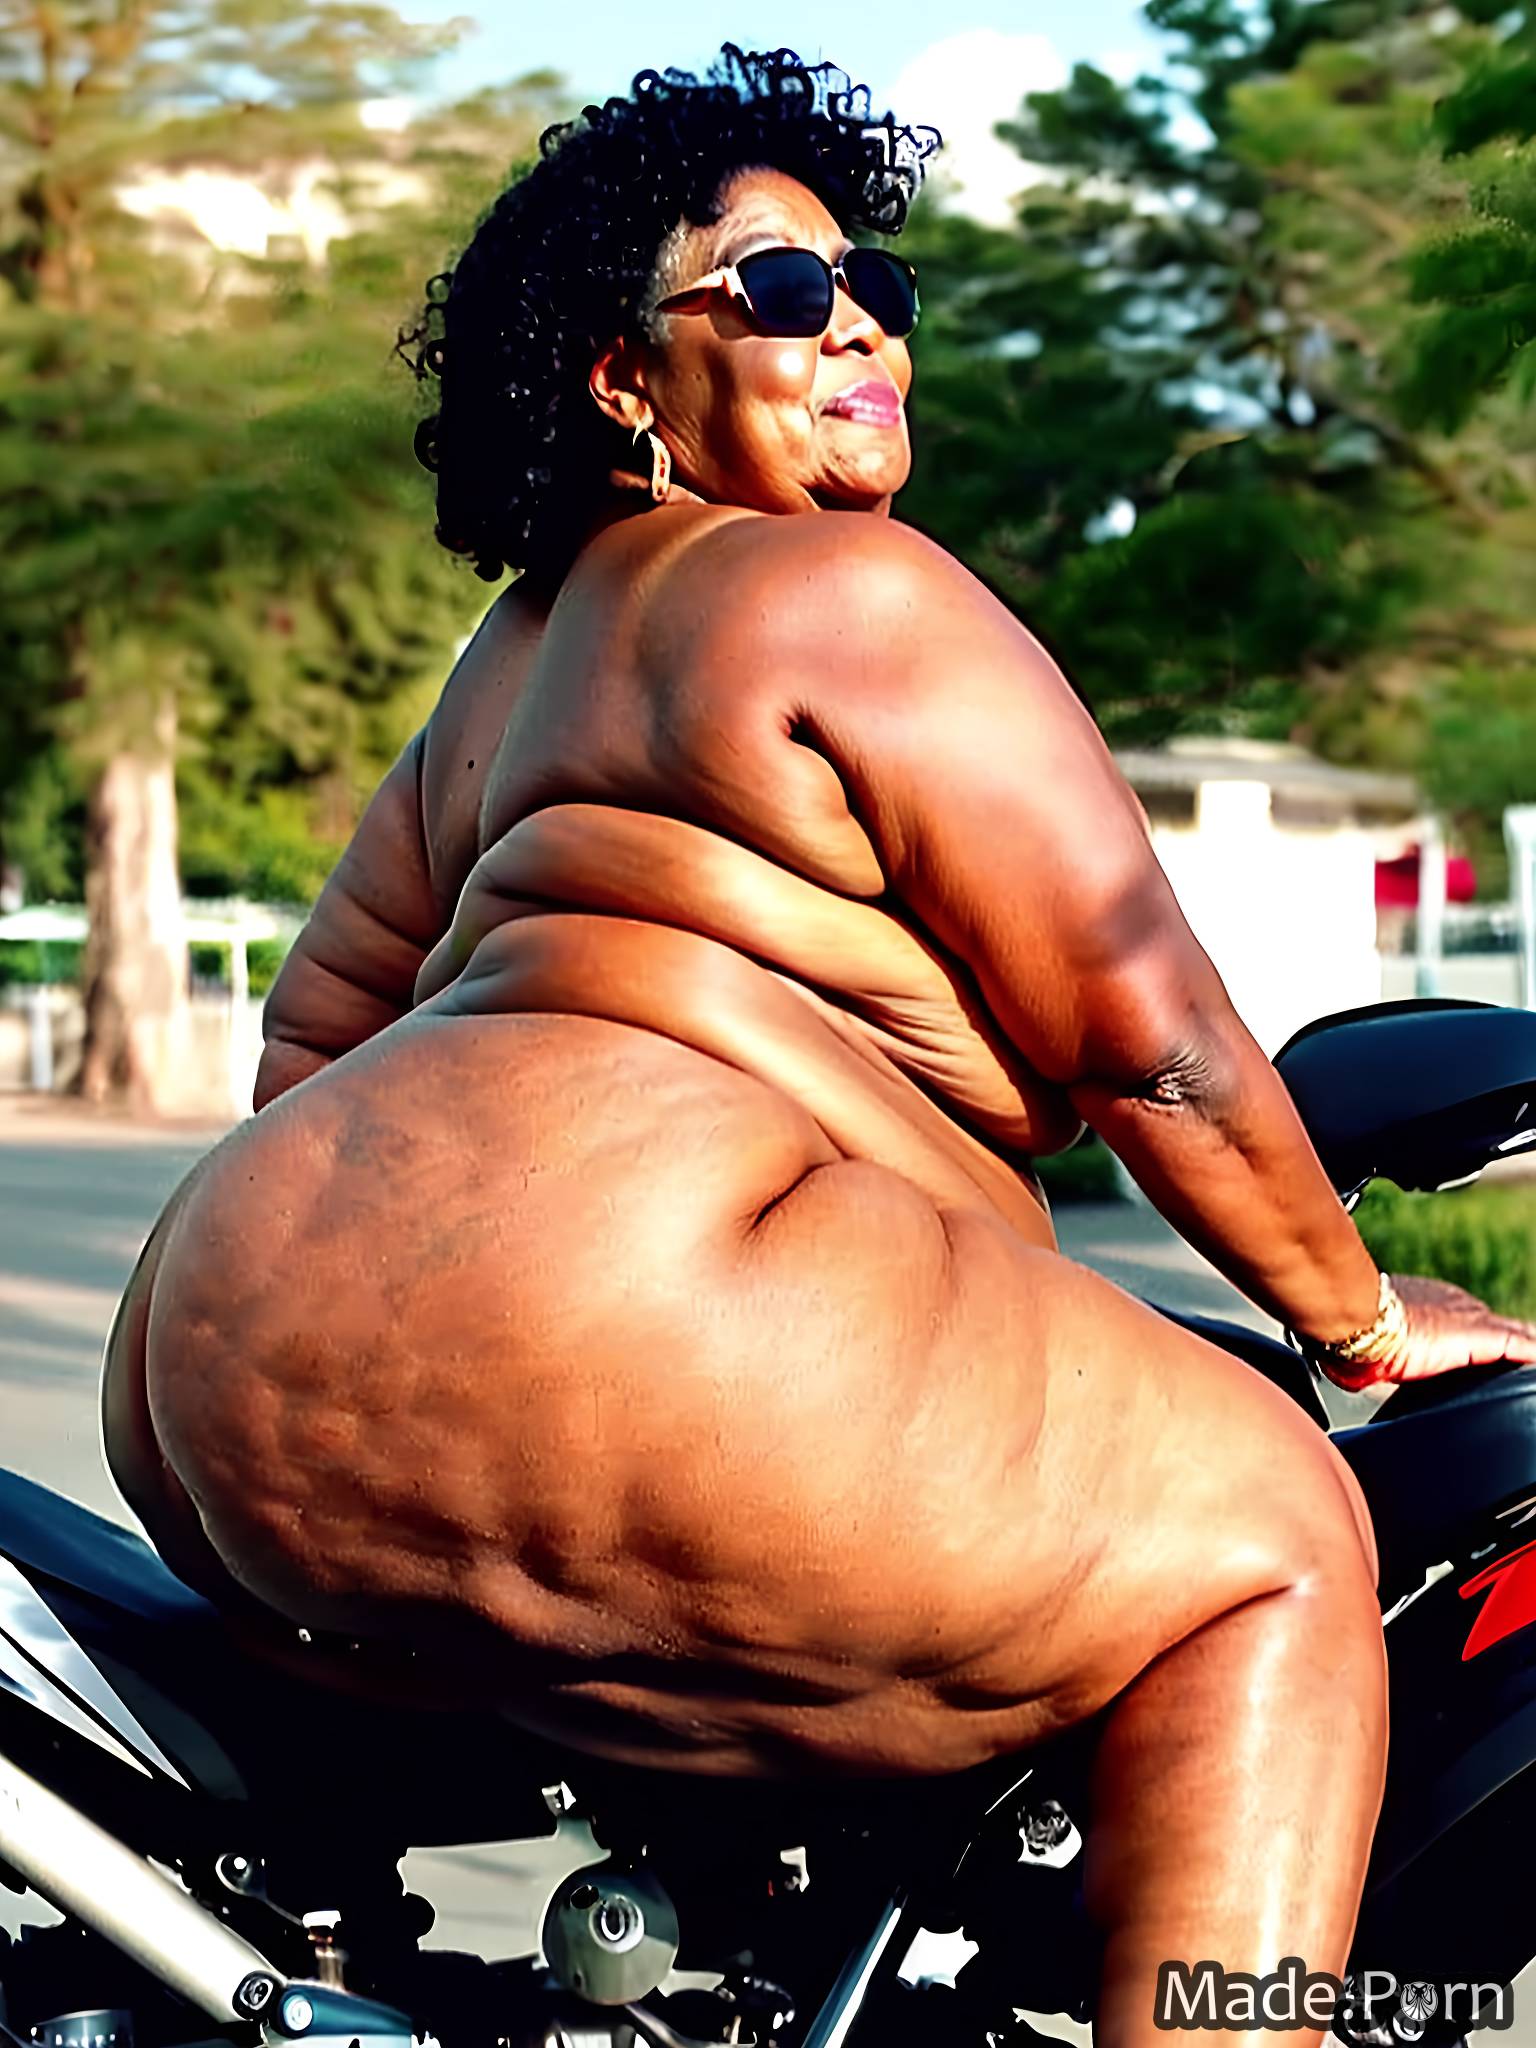 bimbo thick thighs sideview ssbbw nude wild afro sunglasses